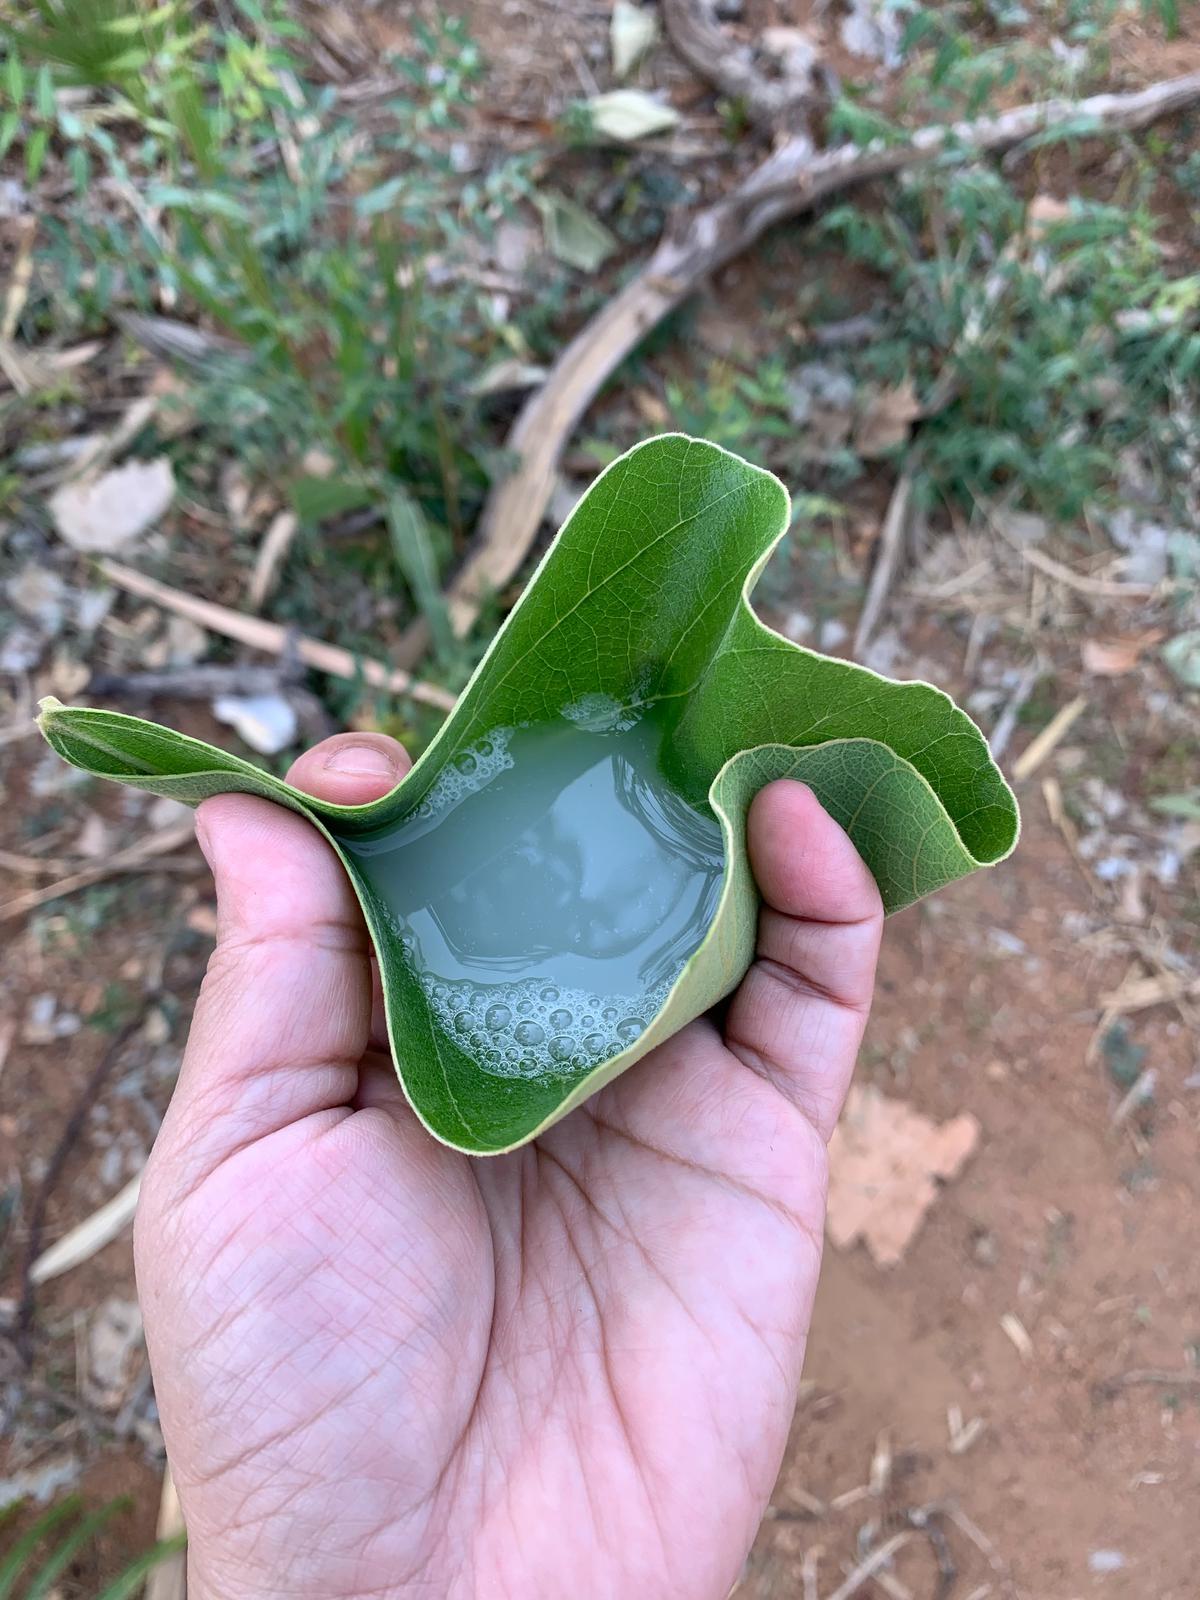 Kallu served in a leaf, as eco-friendly as it gets. This is one of the ways of drinking kallu at toddy huts